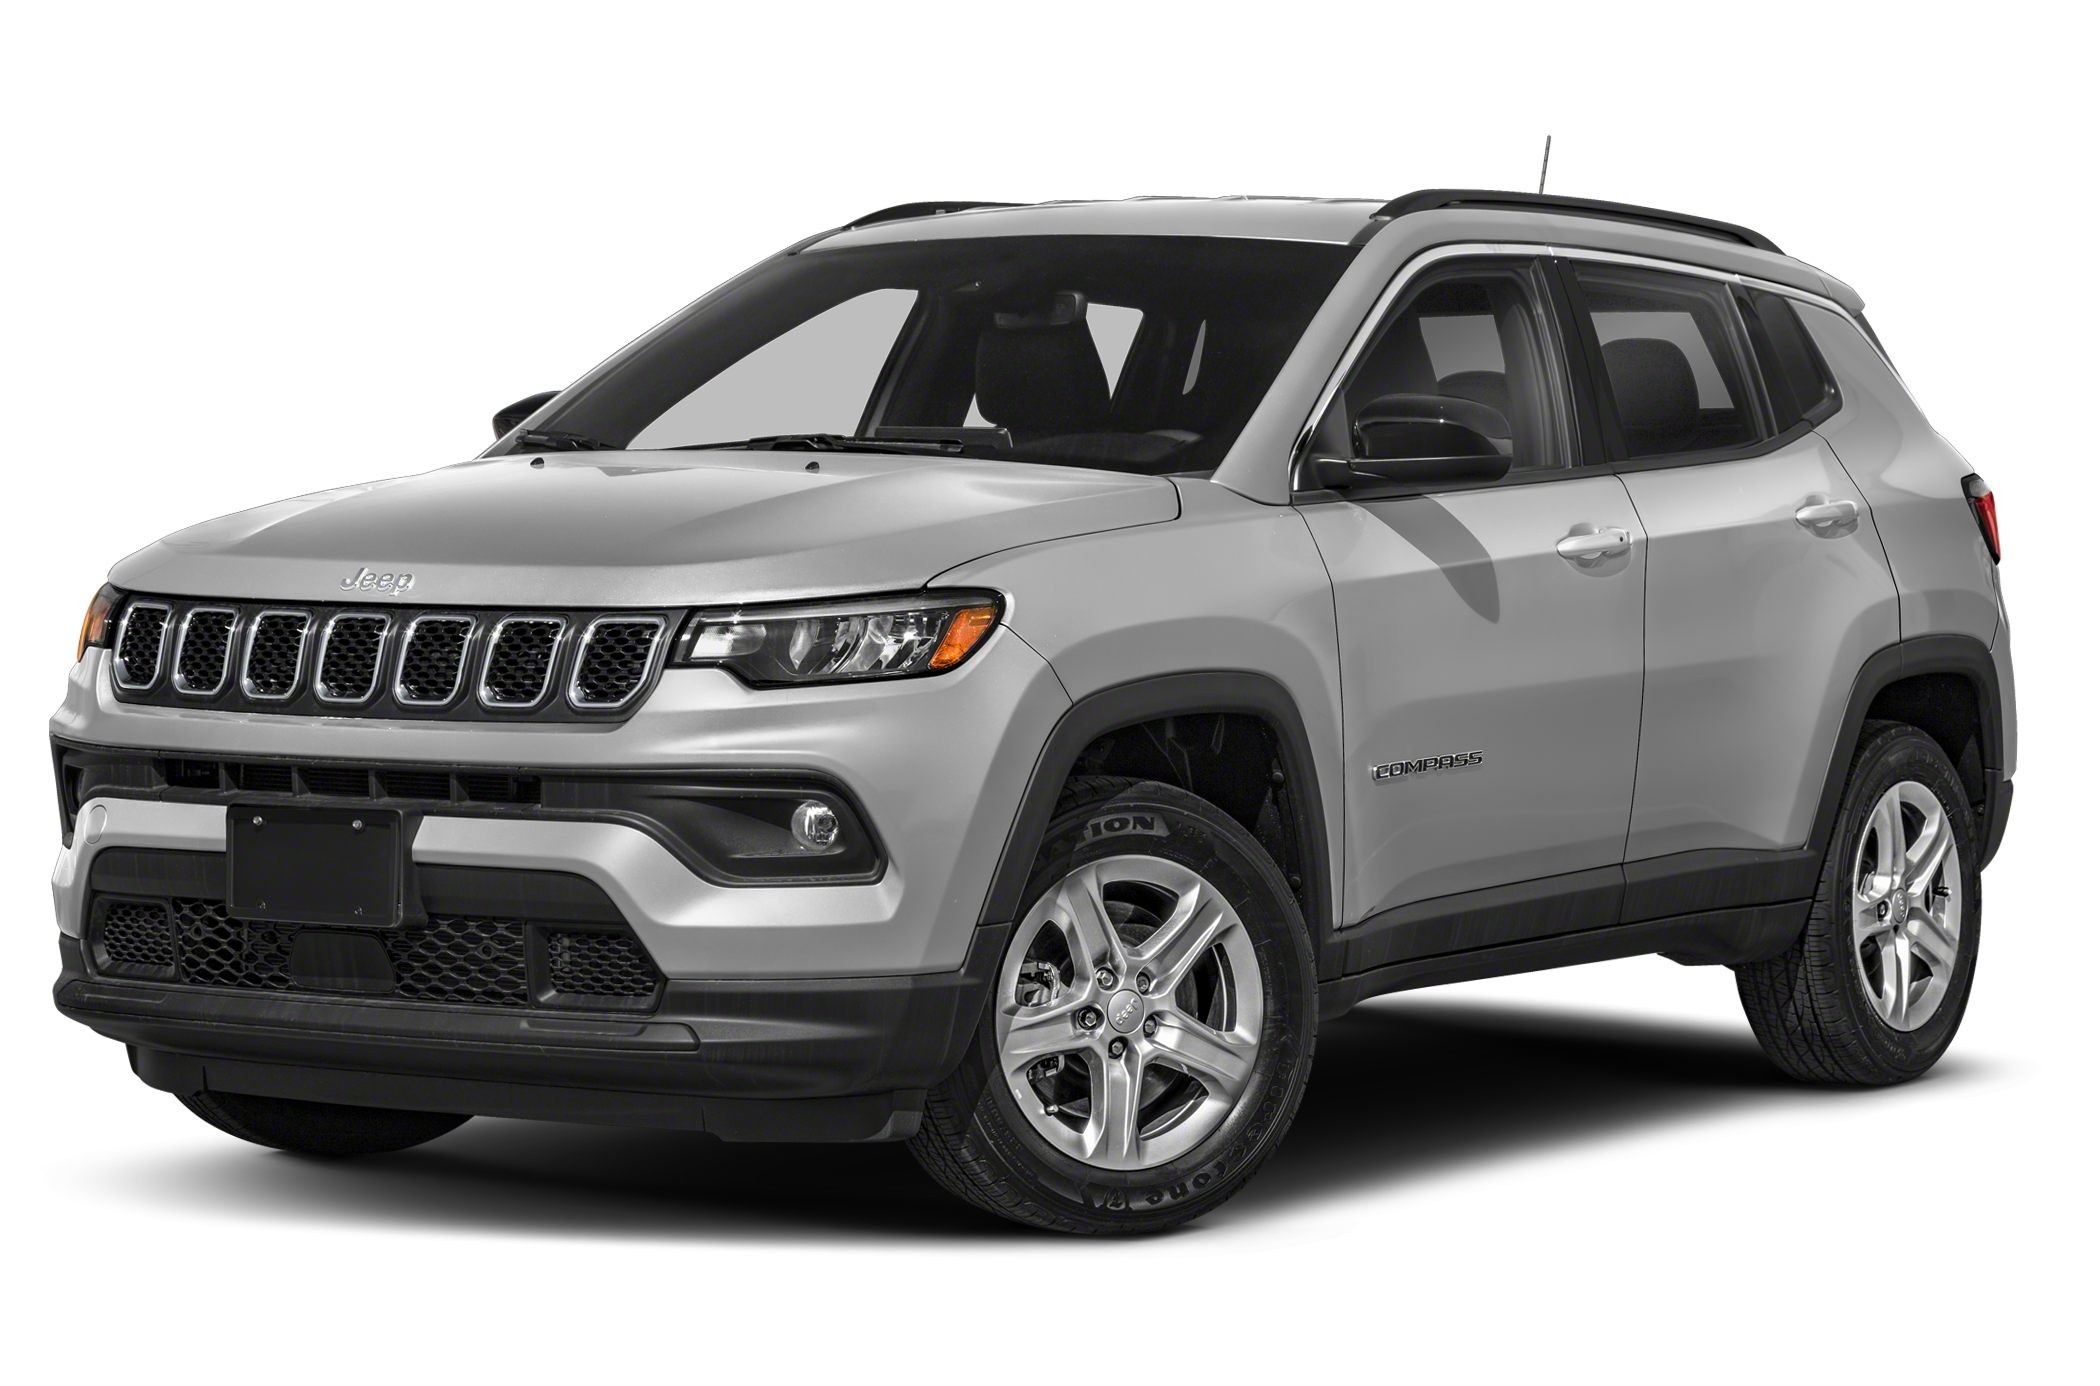 Jeep Compass is getting updated powertrains later this year